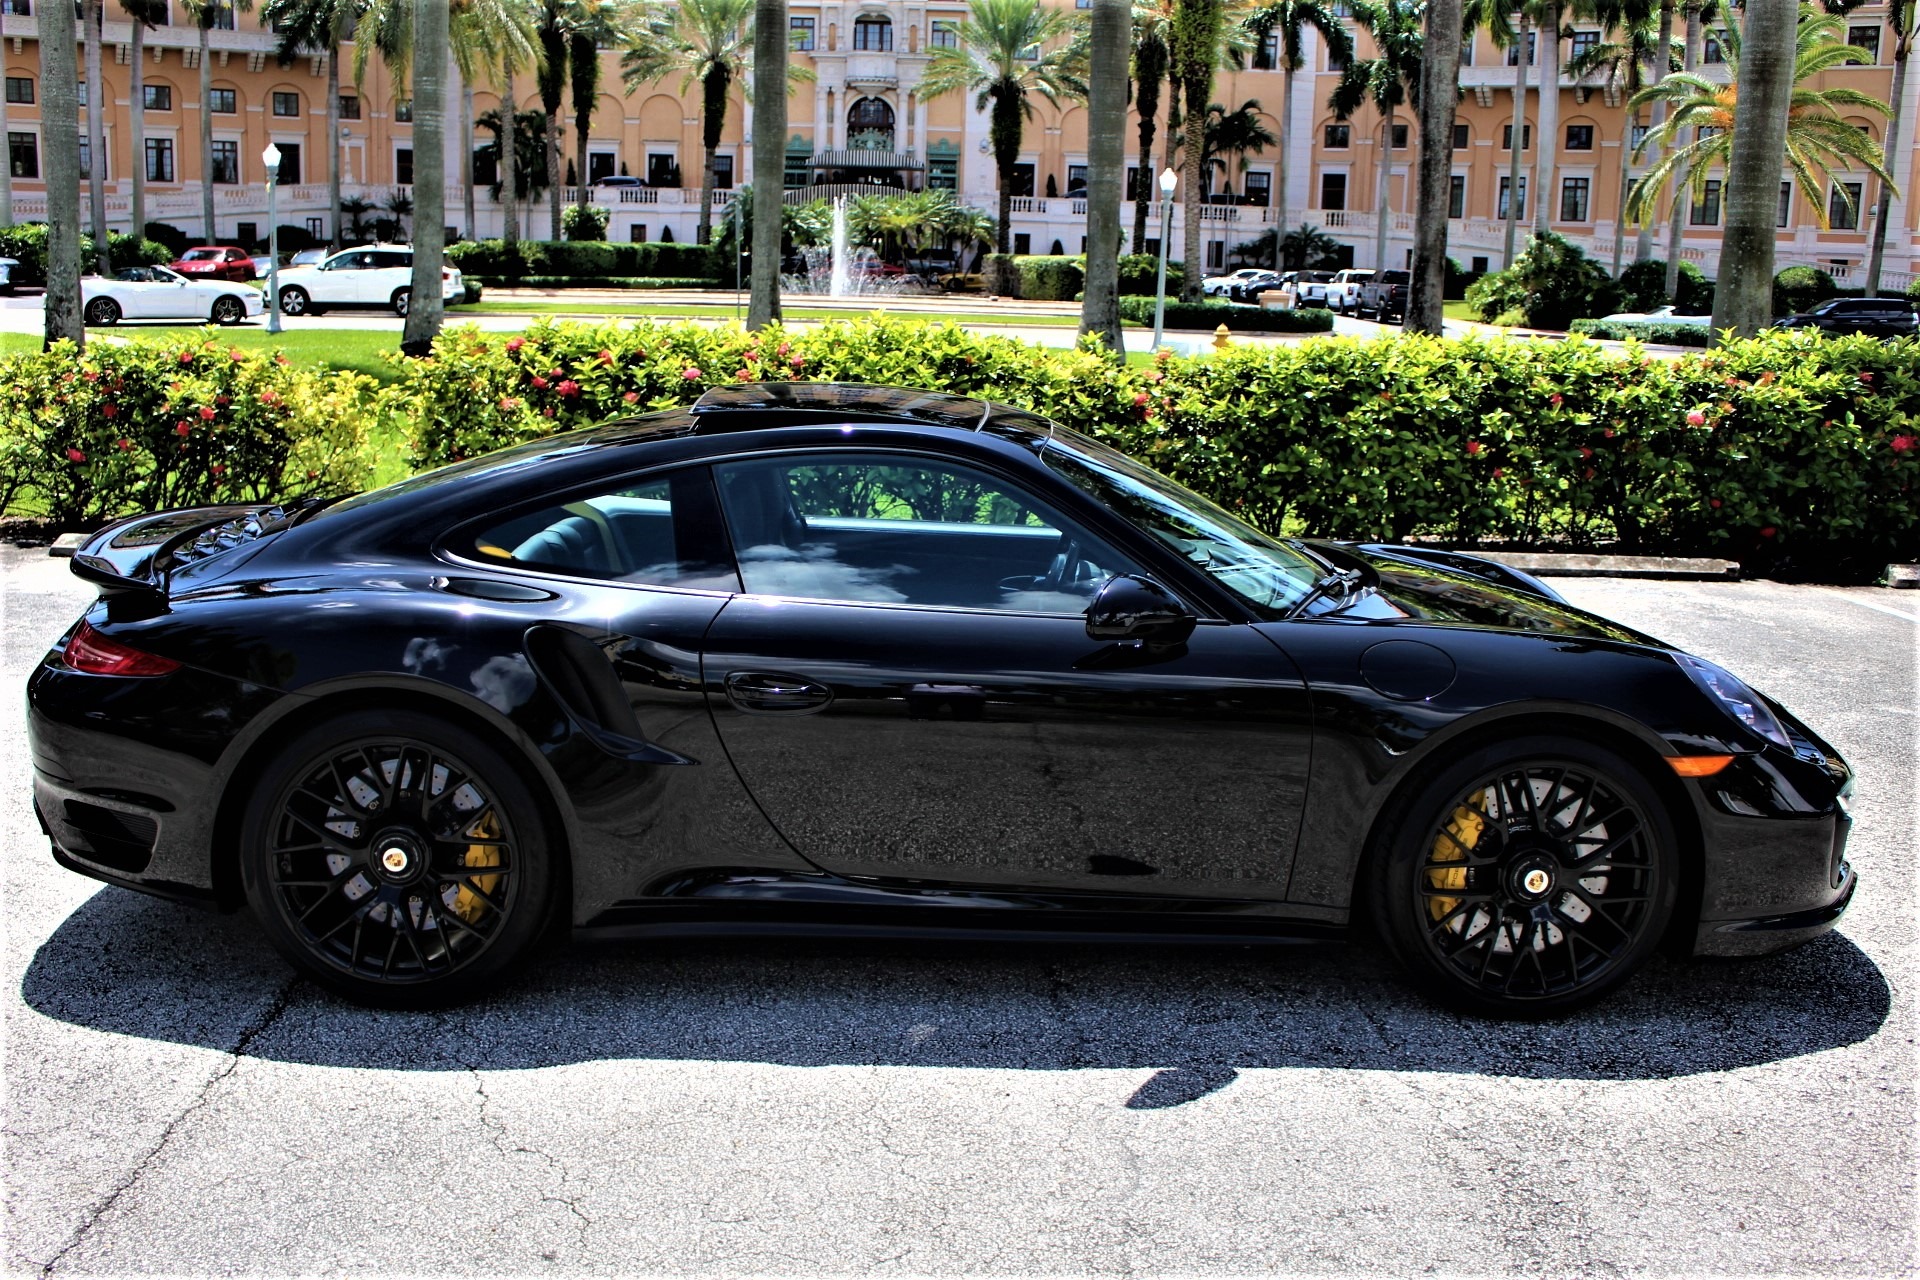 Used 2014 Porsche 911 Turbo S for sale Sold at The Gables Sports Cars in Miami FL 33146 1